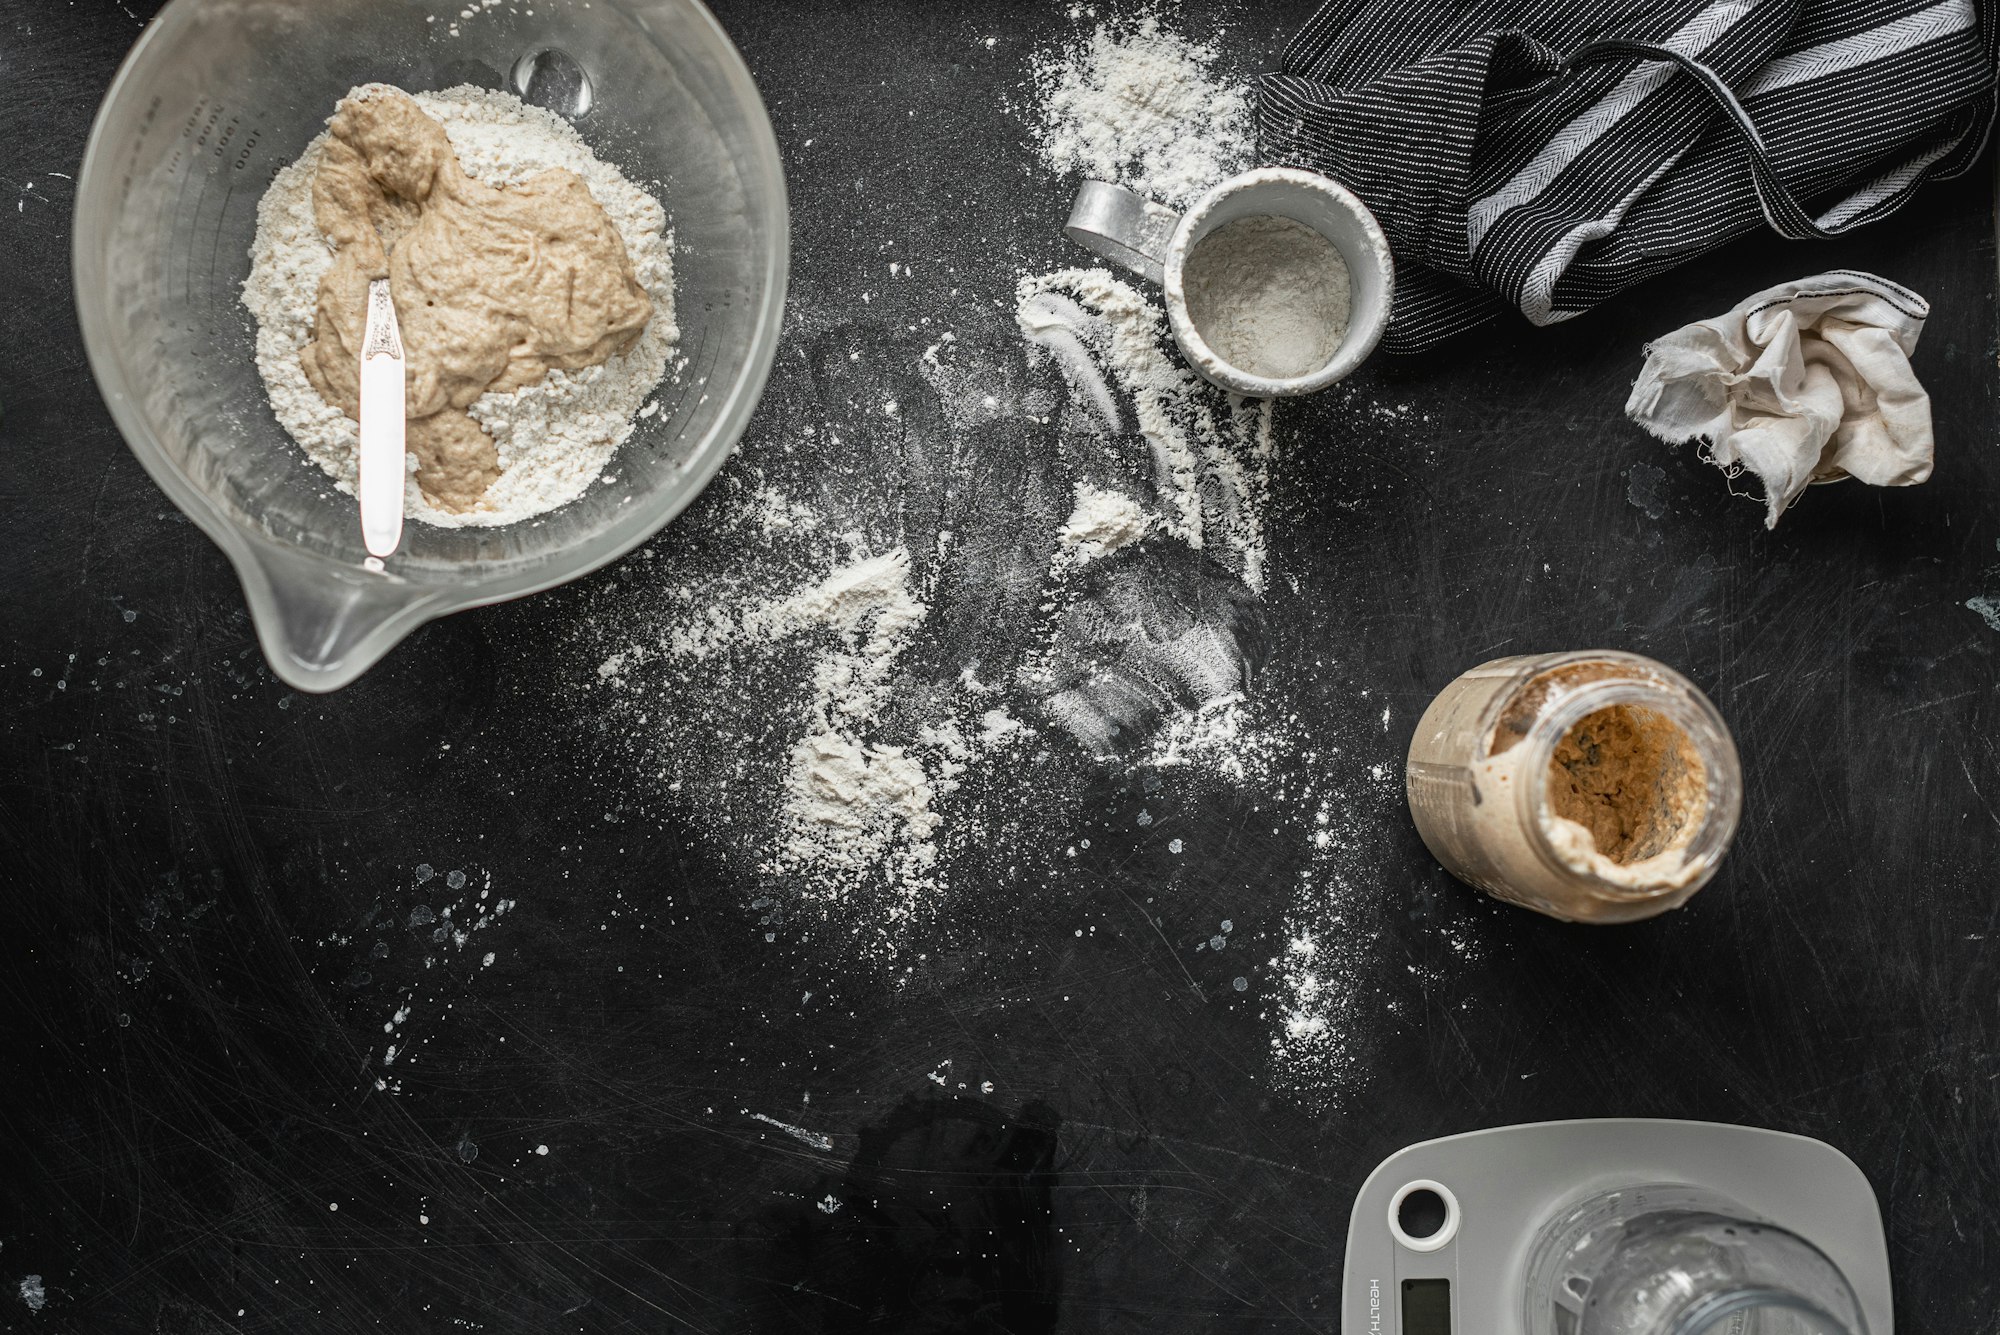 Can cooking and baking serve as a healing tool?